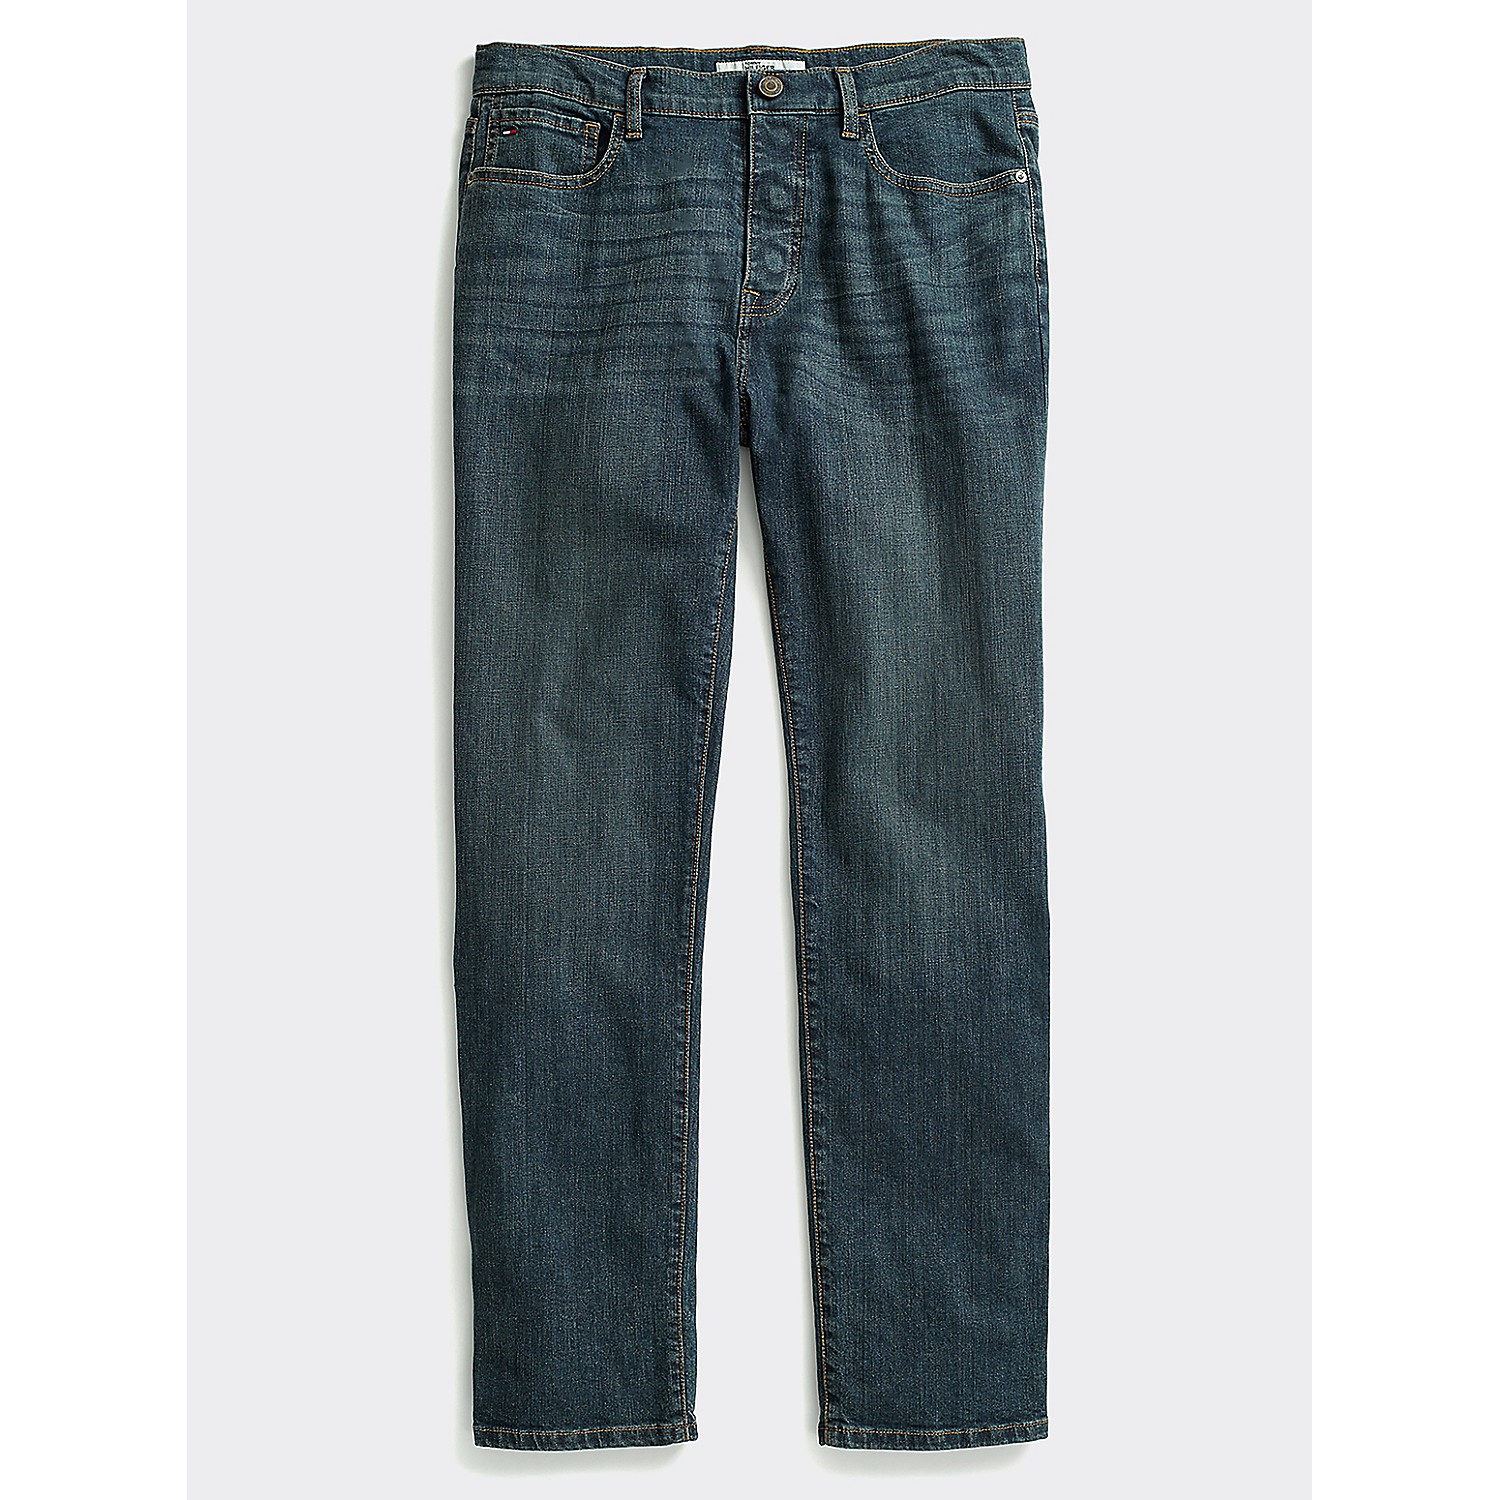 TOMMY HILFIGER Relaxed Fit Jean